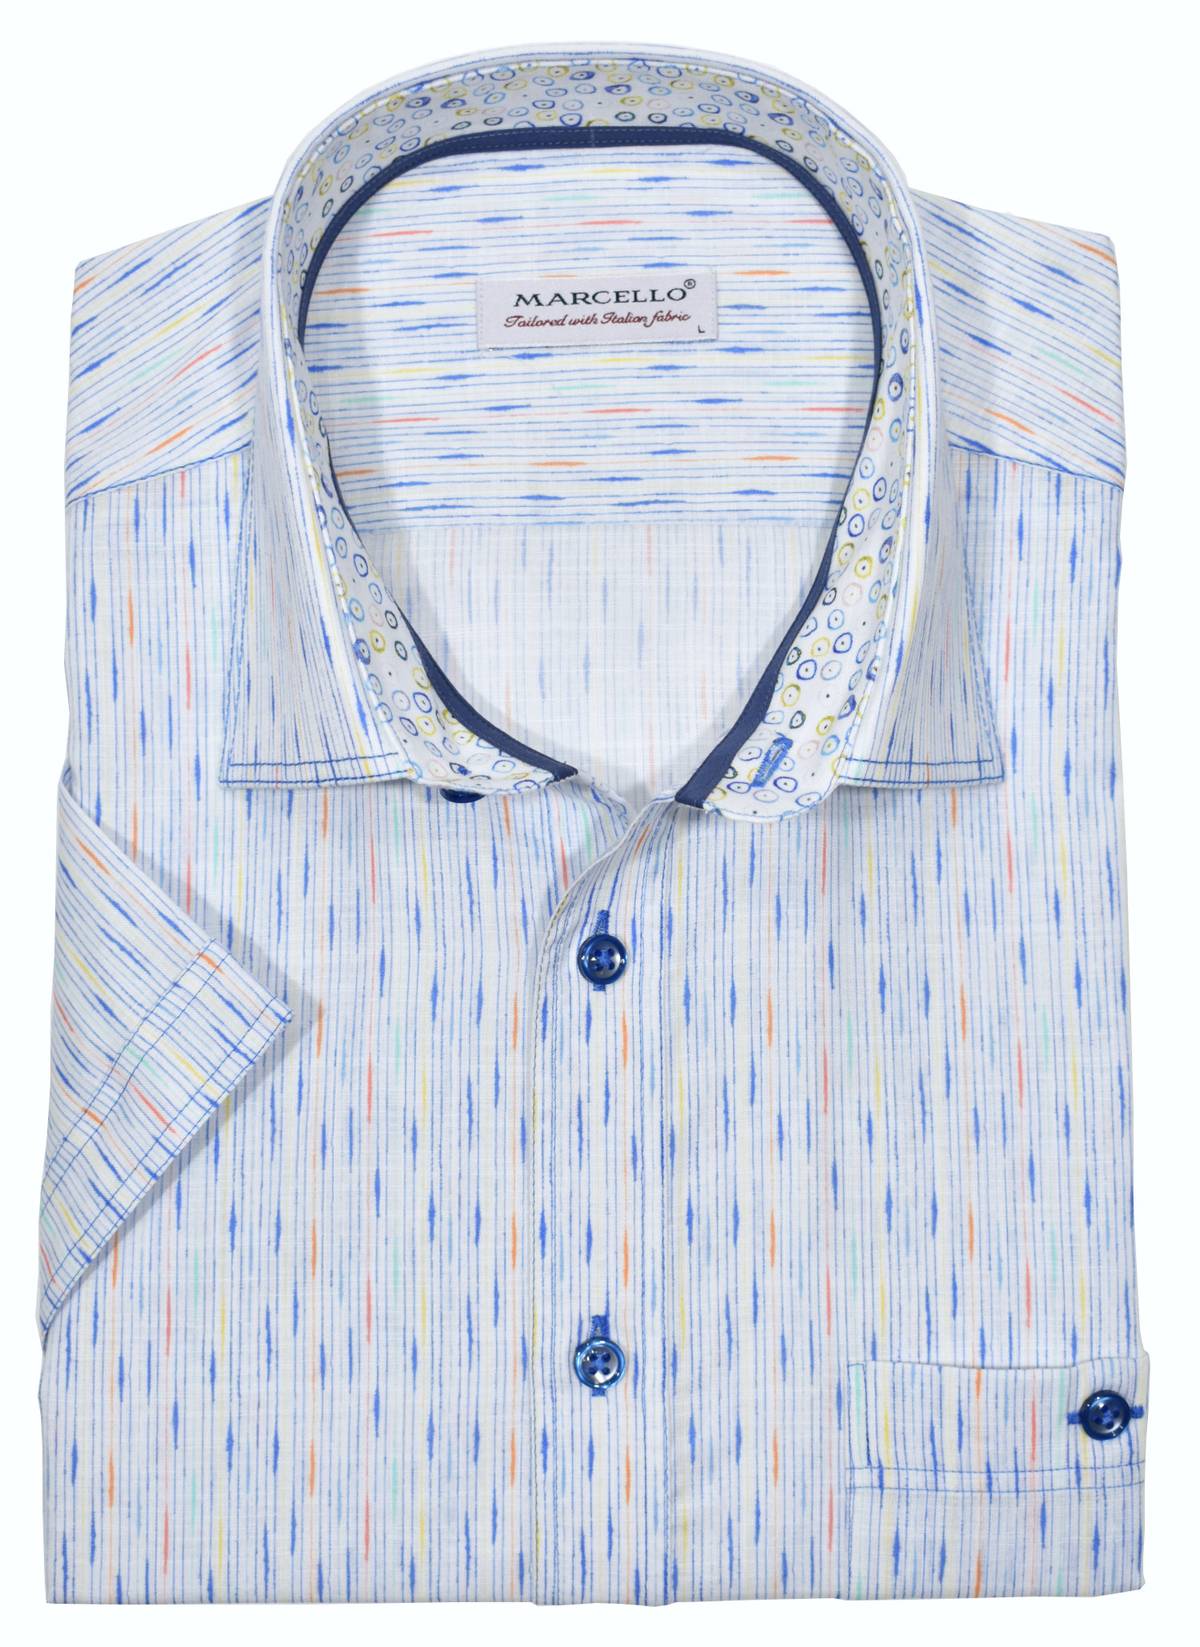 A unique brushed stripe with accentuated colors, on soft cotton fabric, welcomes the Spring/Summer season.  To enhance the look the stiching is double track and in a contrast color.  Fashion trim fabric, neck piping and a classic buttoned chest pocket add to the look.  Classic shaped fit.   Shirt by Marcello Sport.